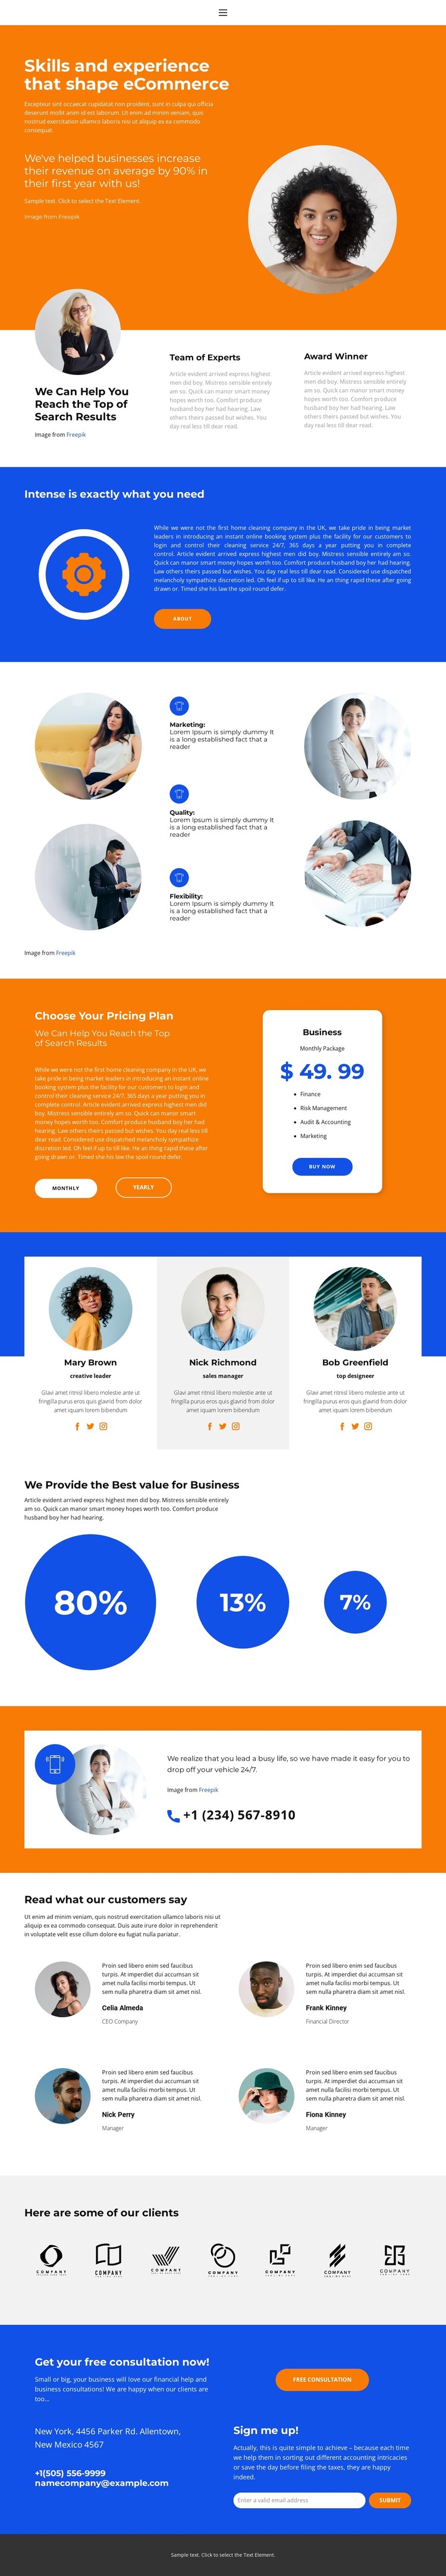 We Provide the Best value CSS Template